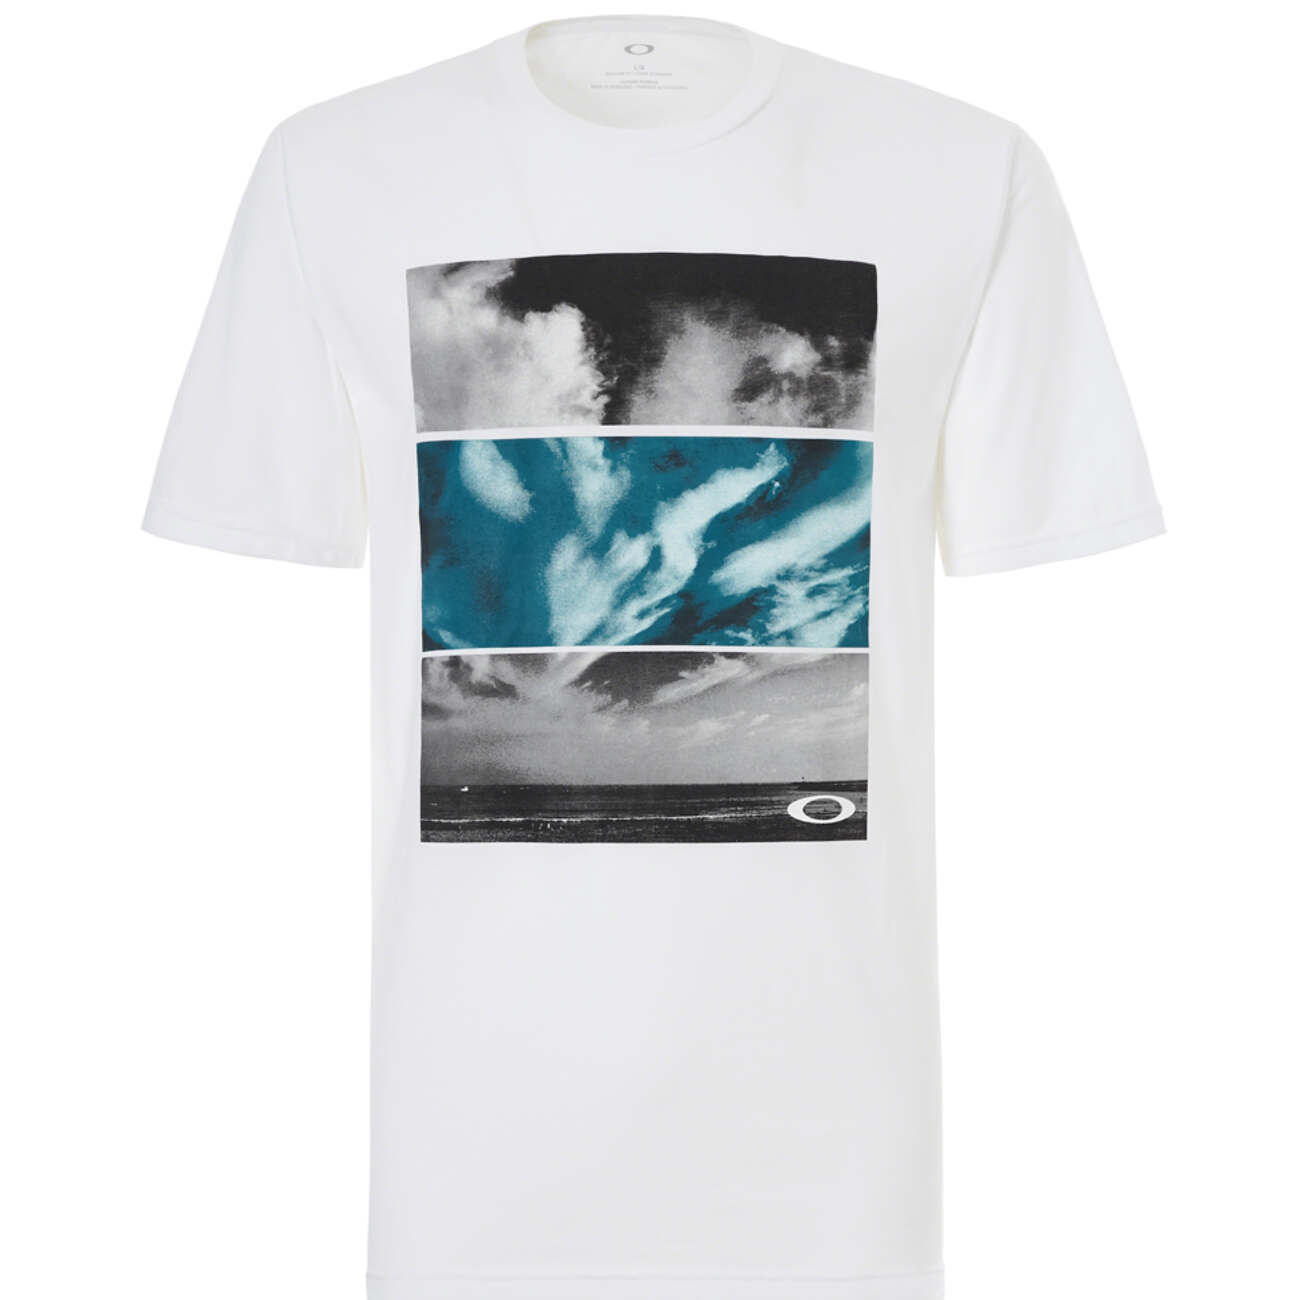 Oakley T-Shirt In The Clouds White